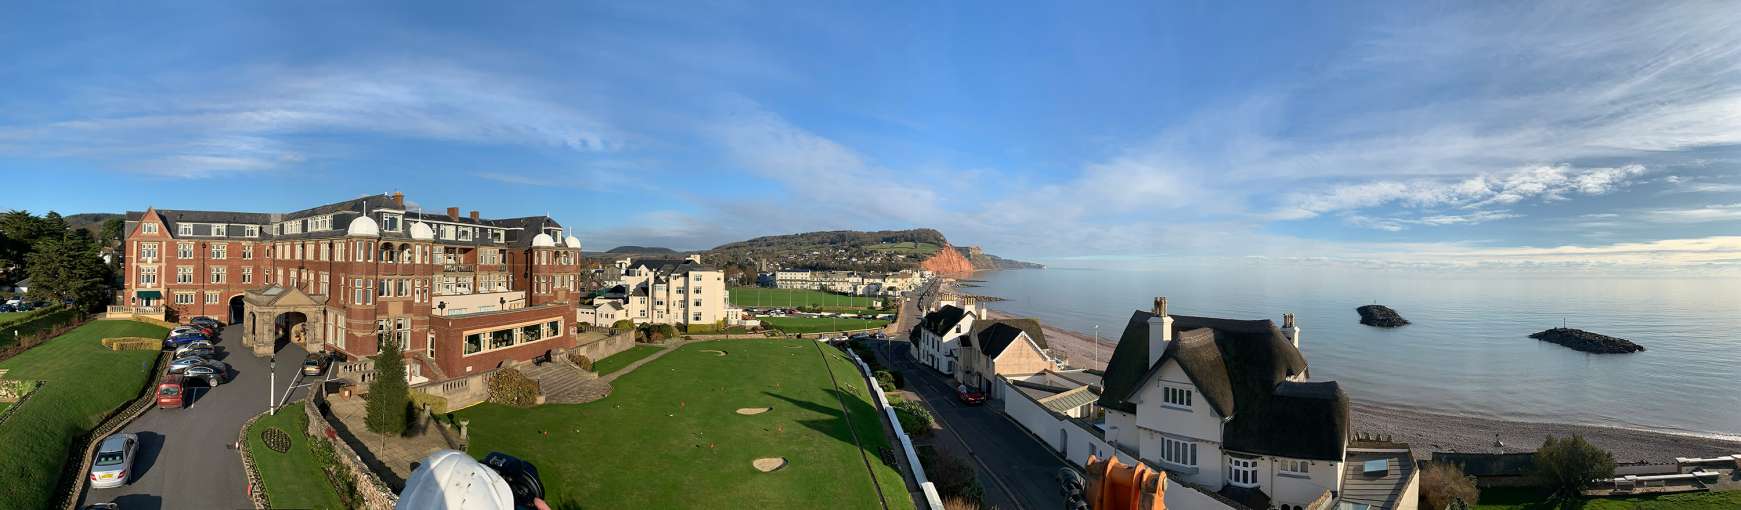 panoramic of Victoria Hotel and Sidmouth